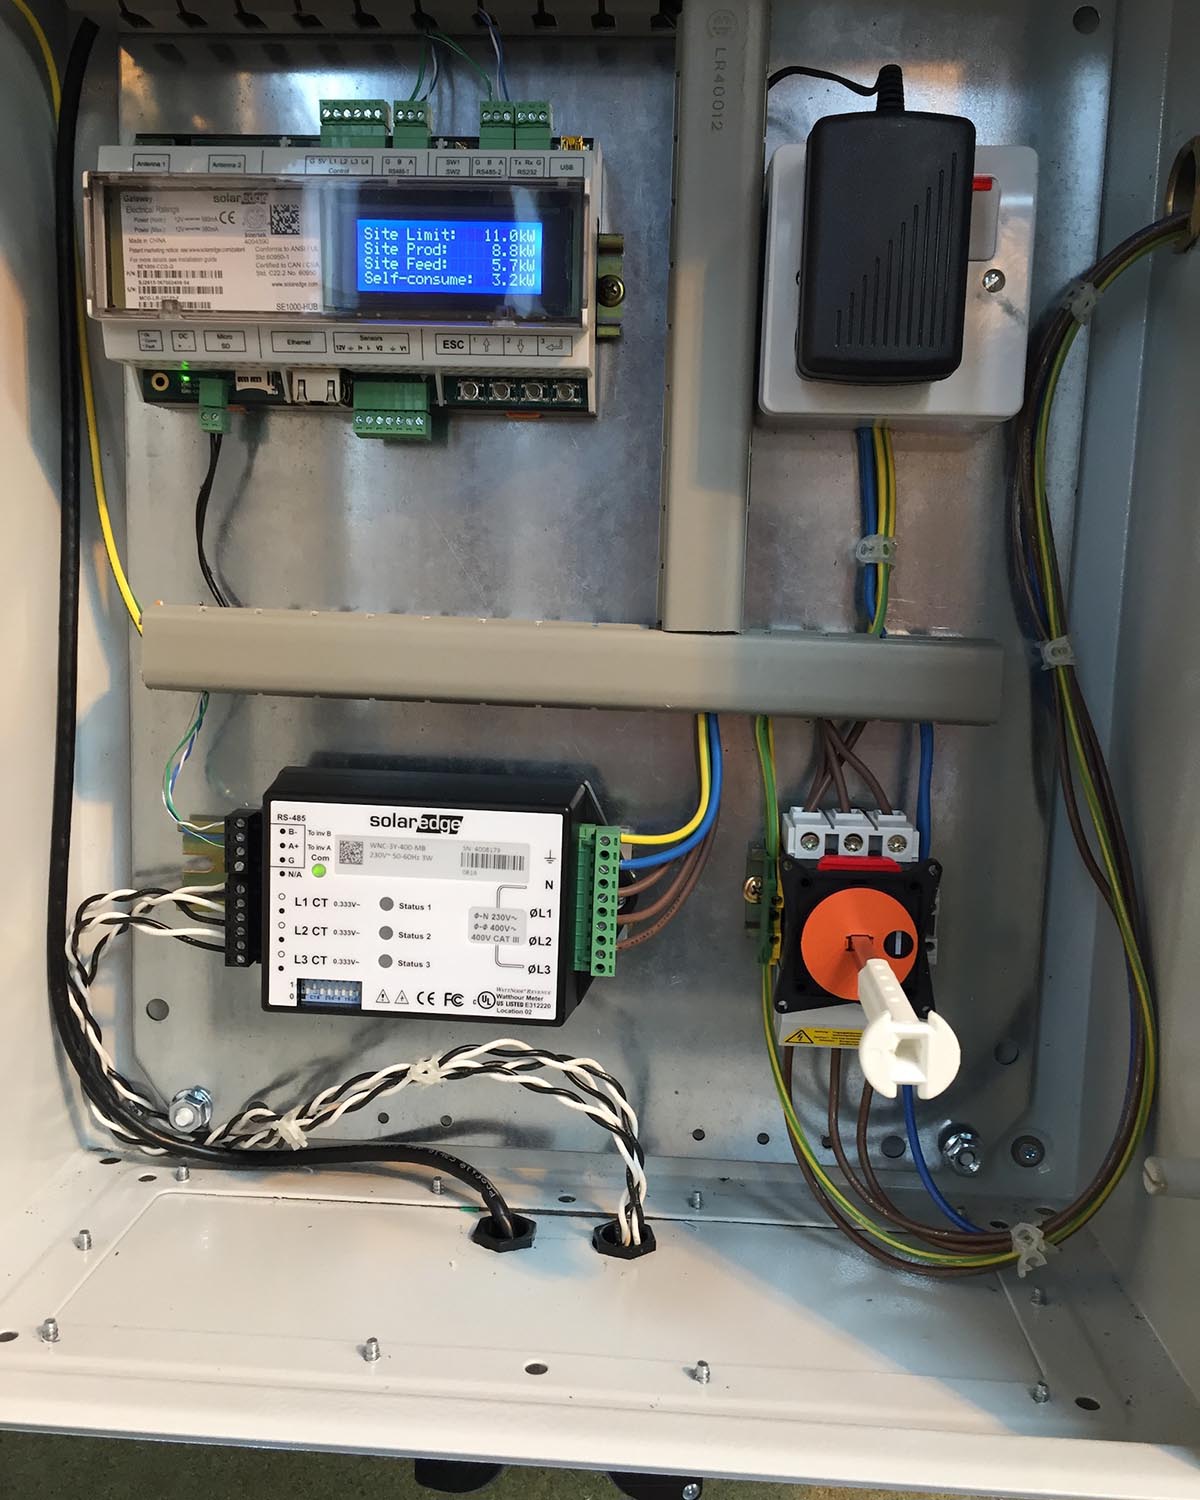 Control board with wires and display screen. NBG Digital Home. Electric Vehicle chargers, Solar and Heat Pumps, General Electrical Services in the South West.